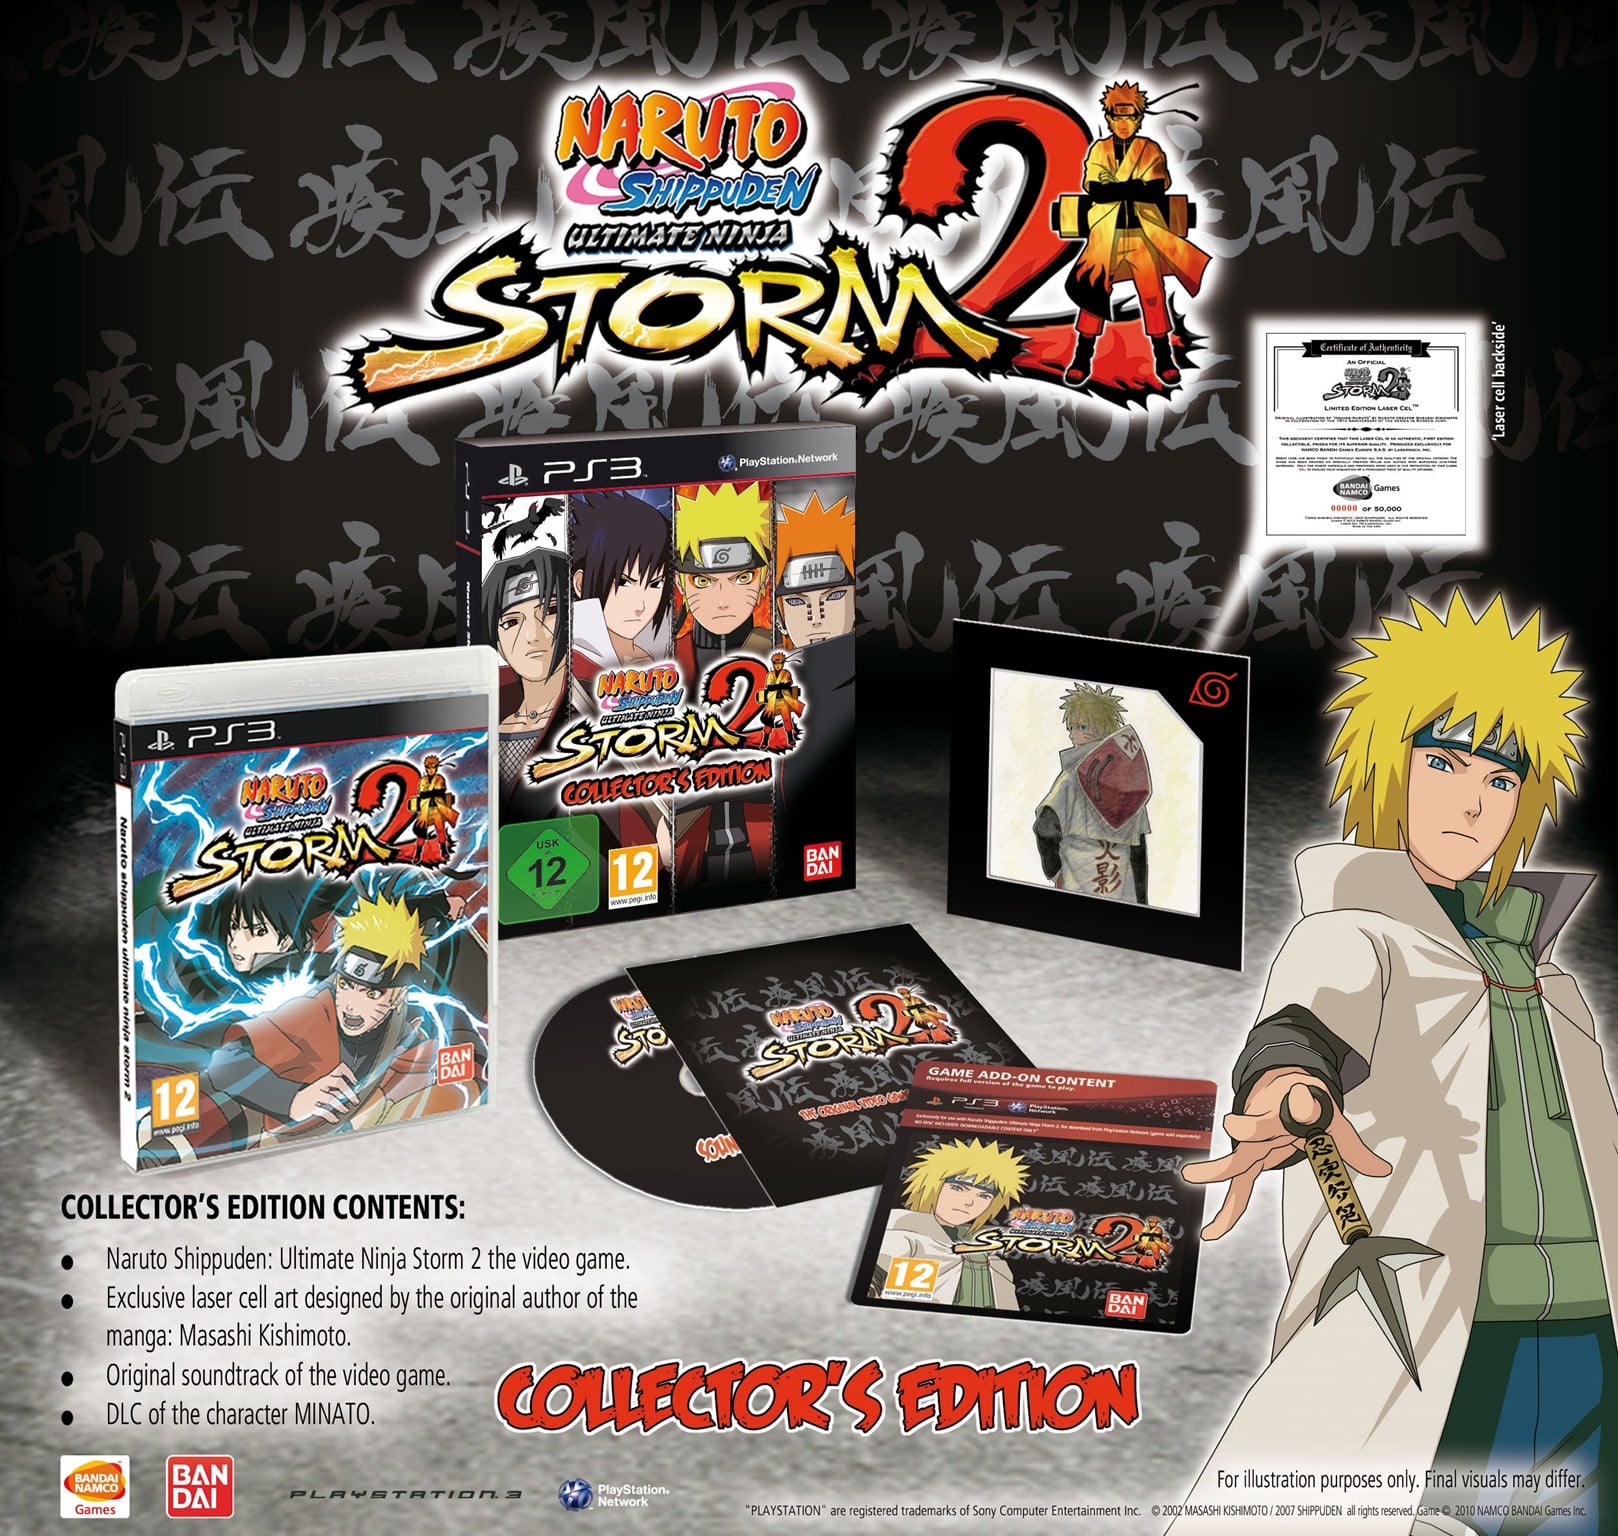 ultimate-ninja-storm-2-special-collectors-edition-deluxe-set-picture-xbox-360-ps3.jpg